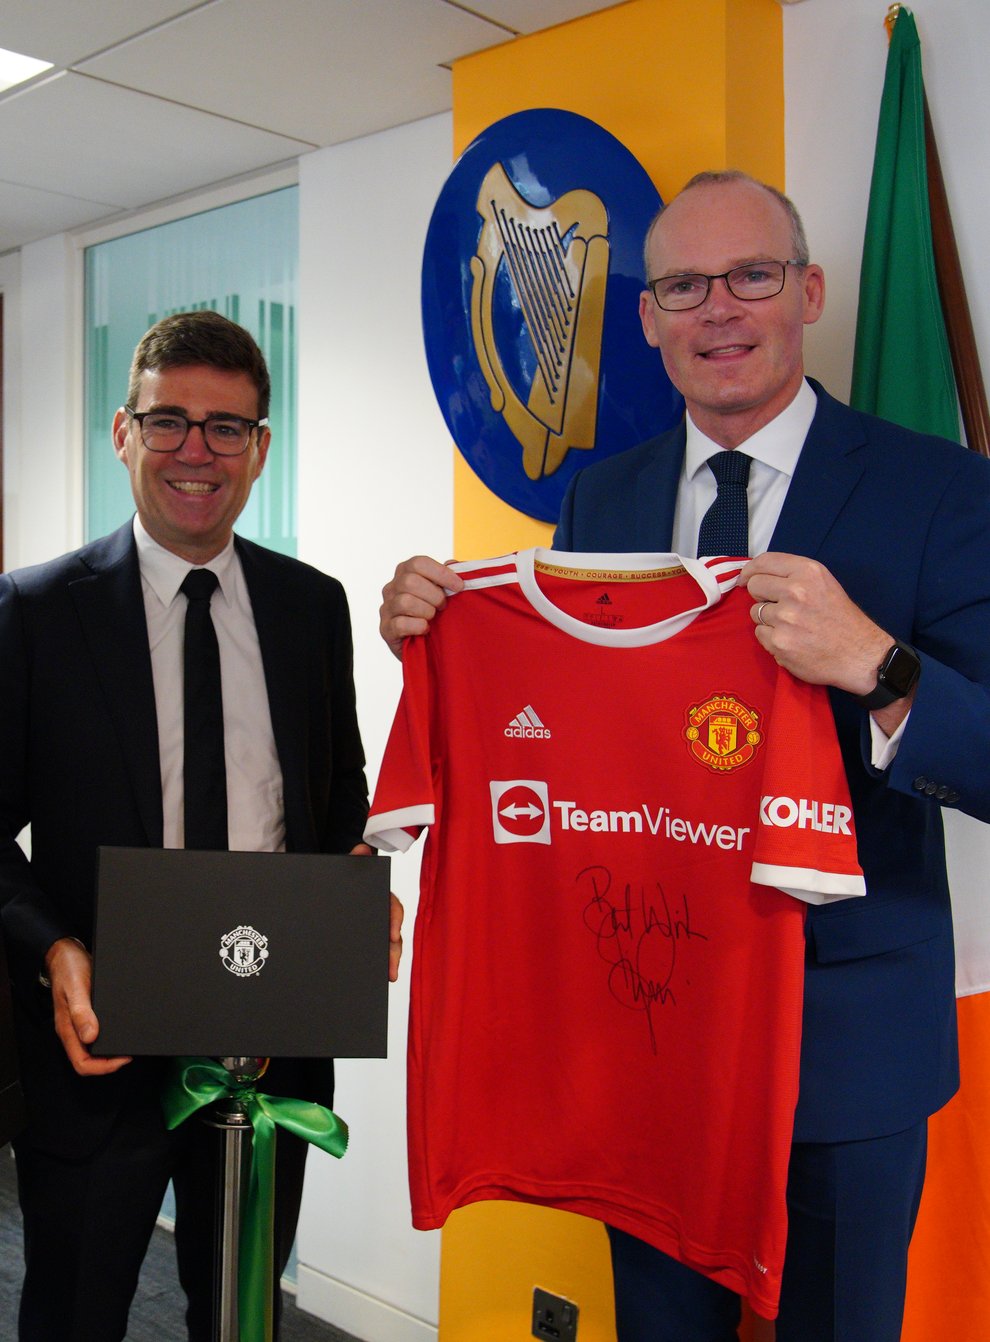 Foreign Affairs Minister Simon Coveney being presented with a signed Denis Irwin Manchester United FC shirt by Stockport Council Leader Elise Wilson and mayor of Greater Manchester, Andy Burnham, in Manchester, at the official opening of the Consulate General of Ireland for the North of England (Peter Byrne/PA)